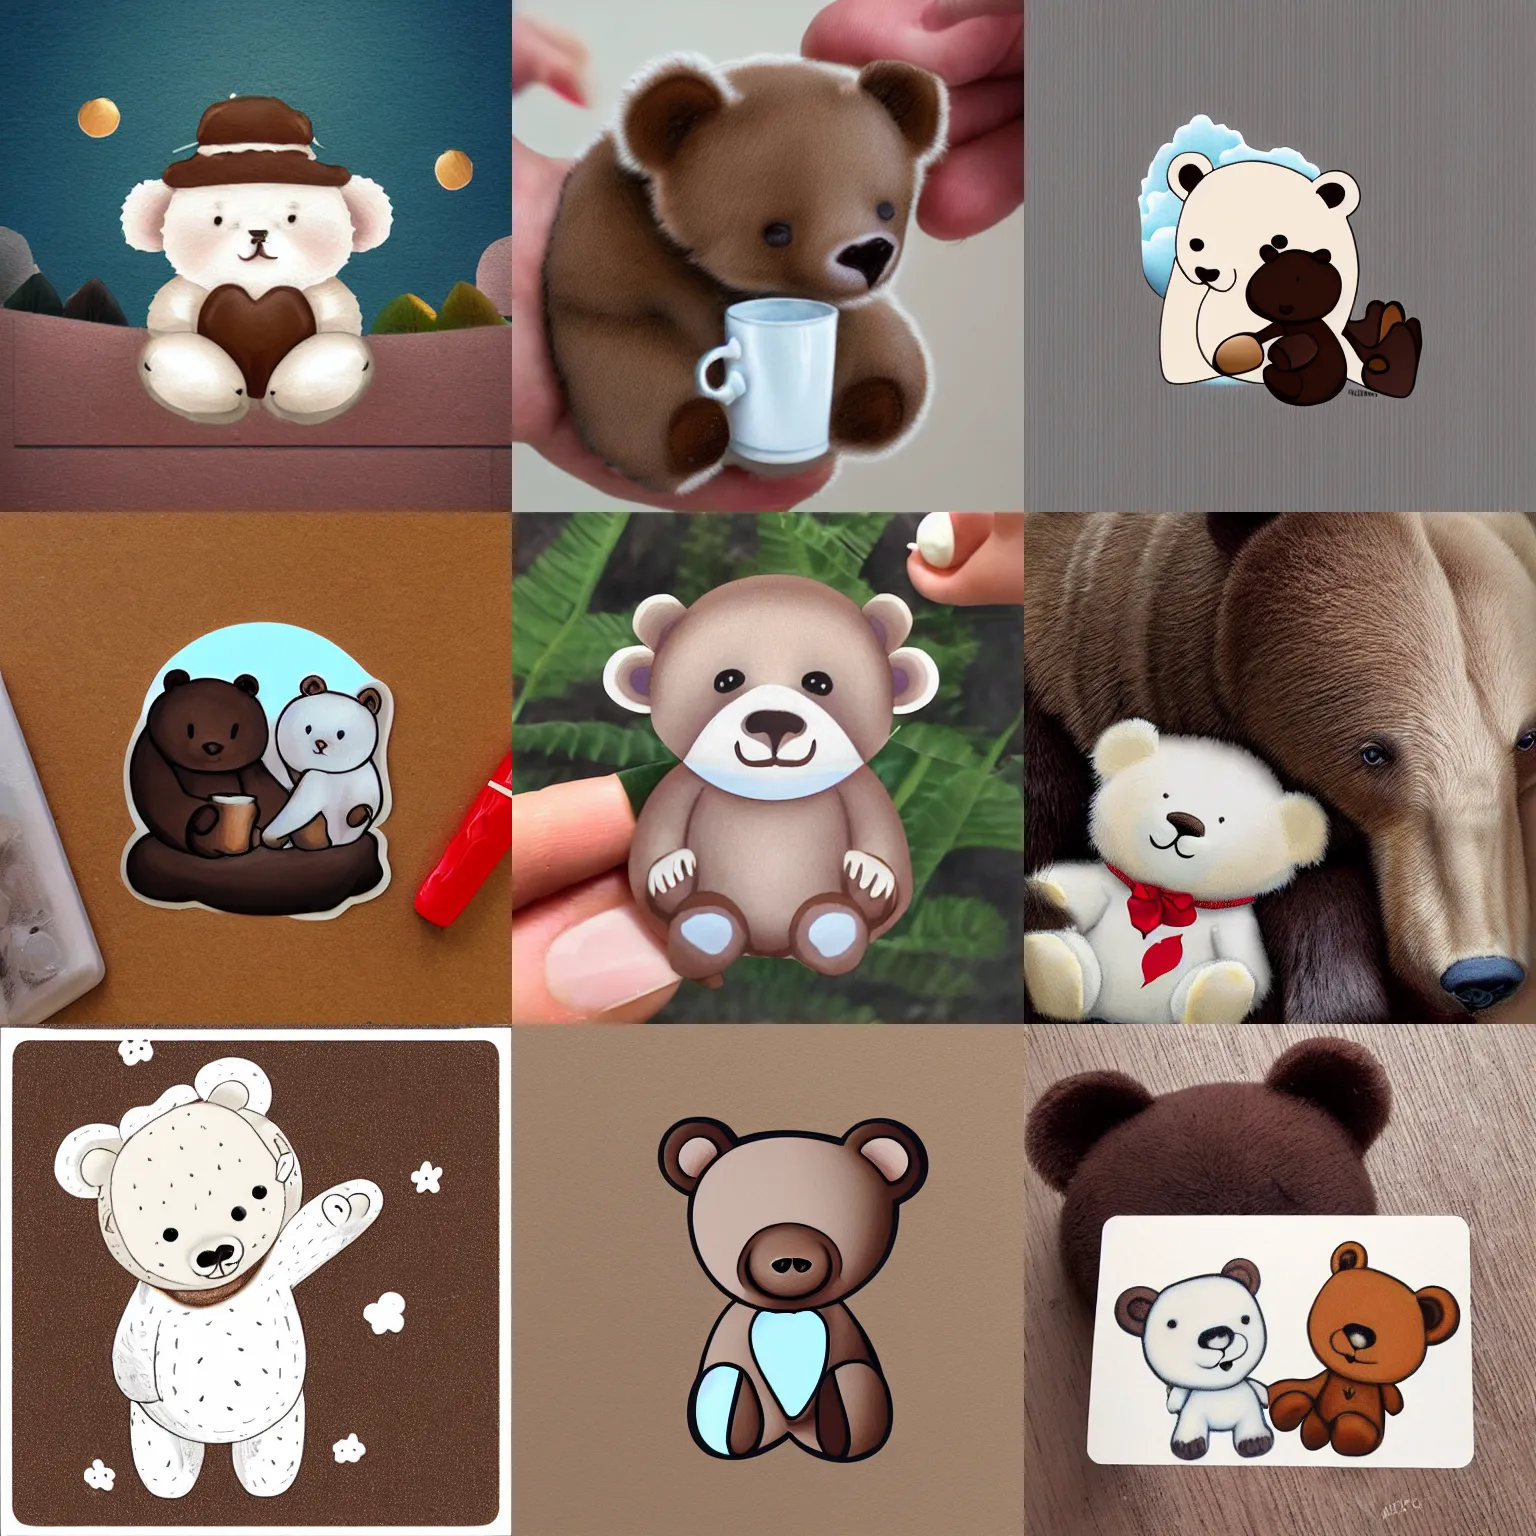 Prompt: milk & mocha bear by melani sie, milk is a white bear and mocha is a brown bear, cute and adorable, matte painting, cartoon, sticker